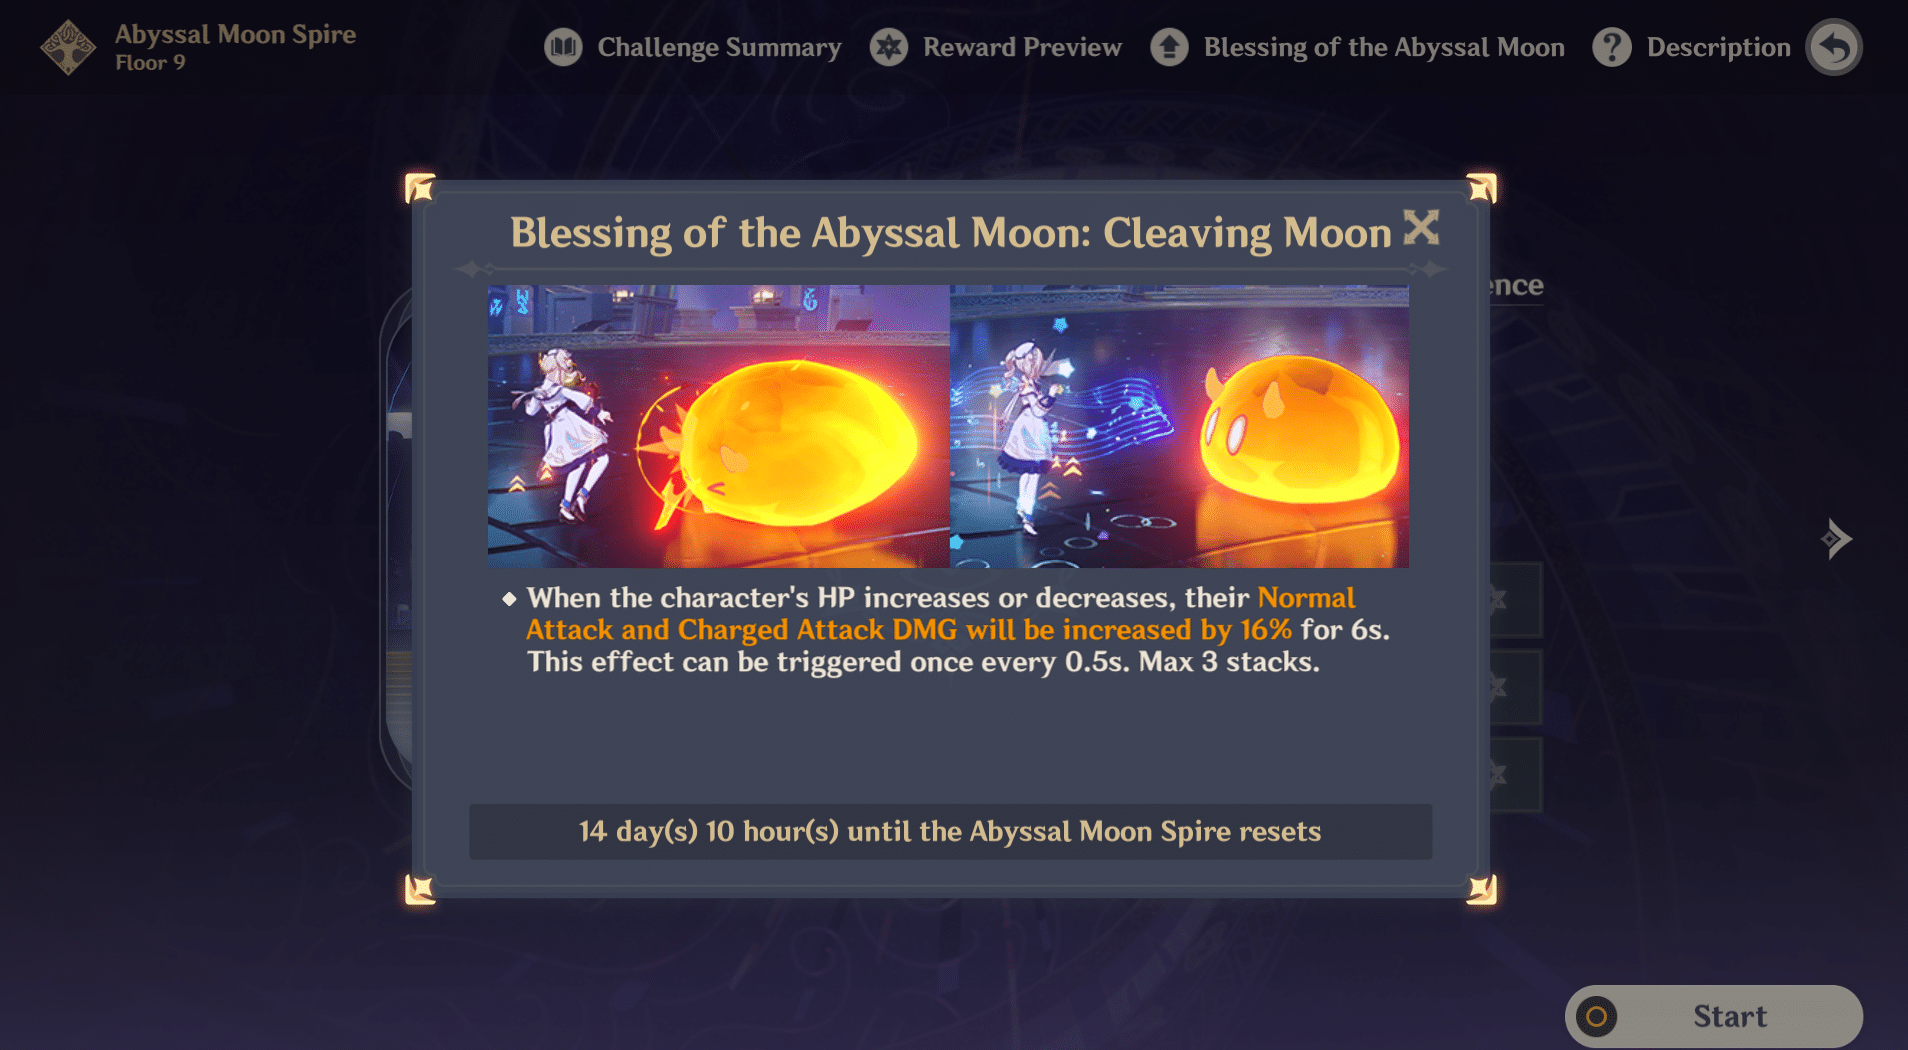 Blessing of the Abyssal Moon